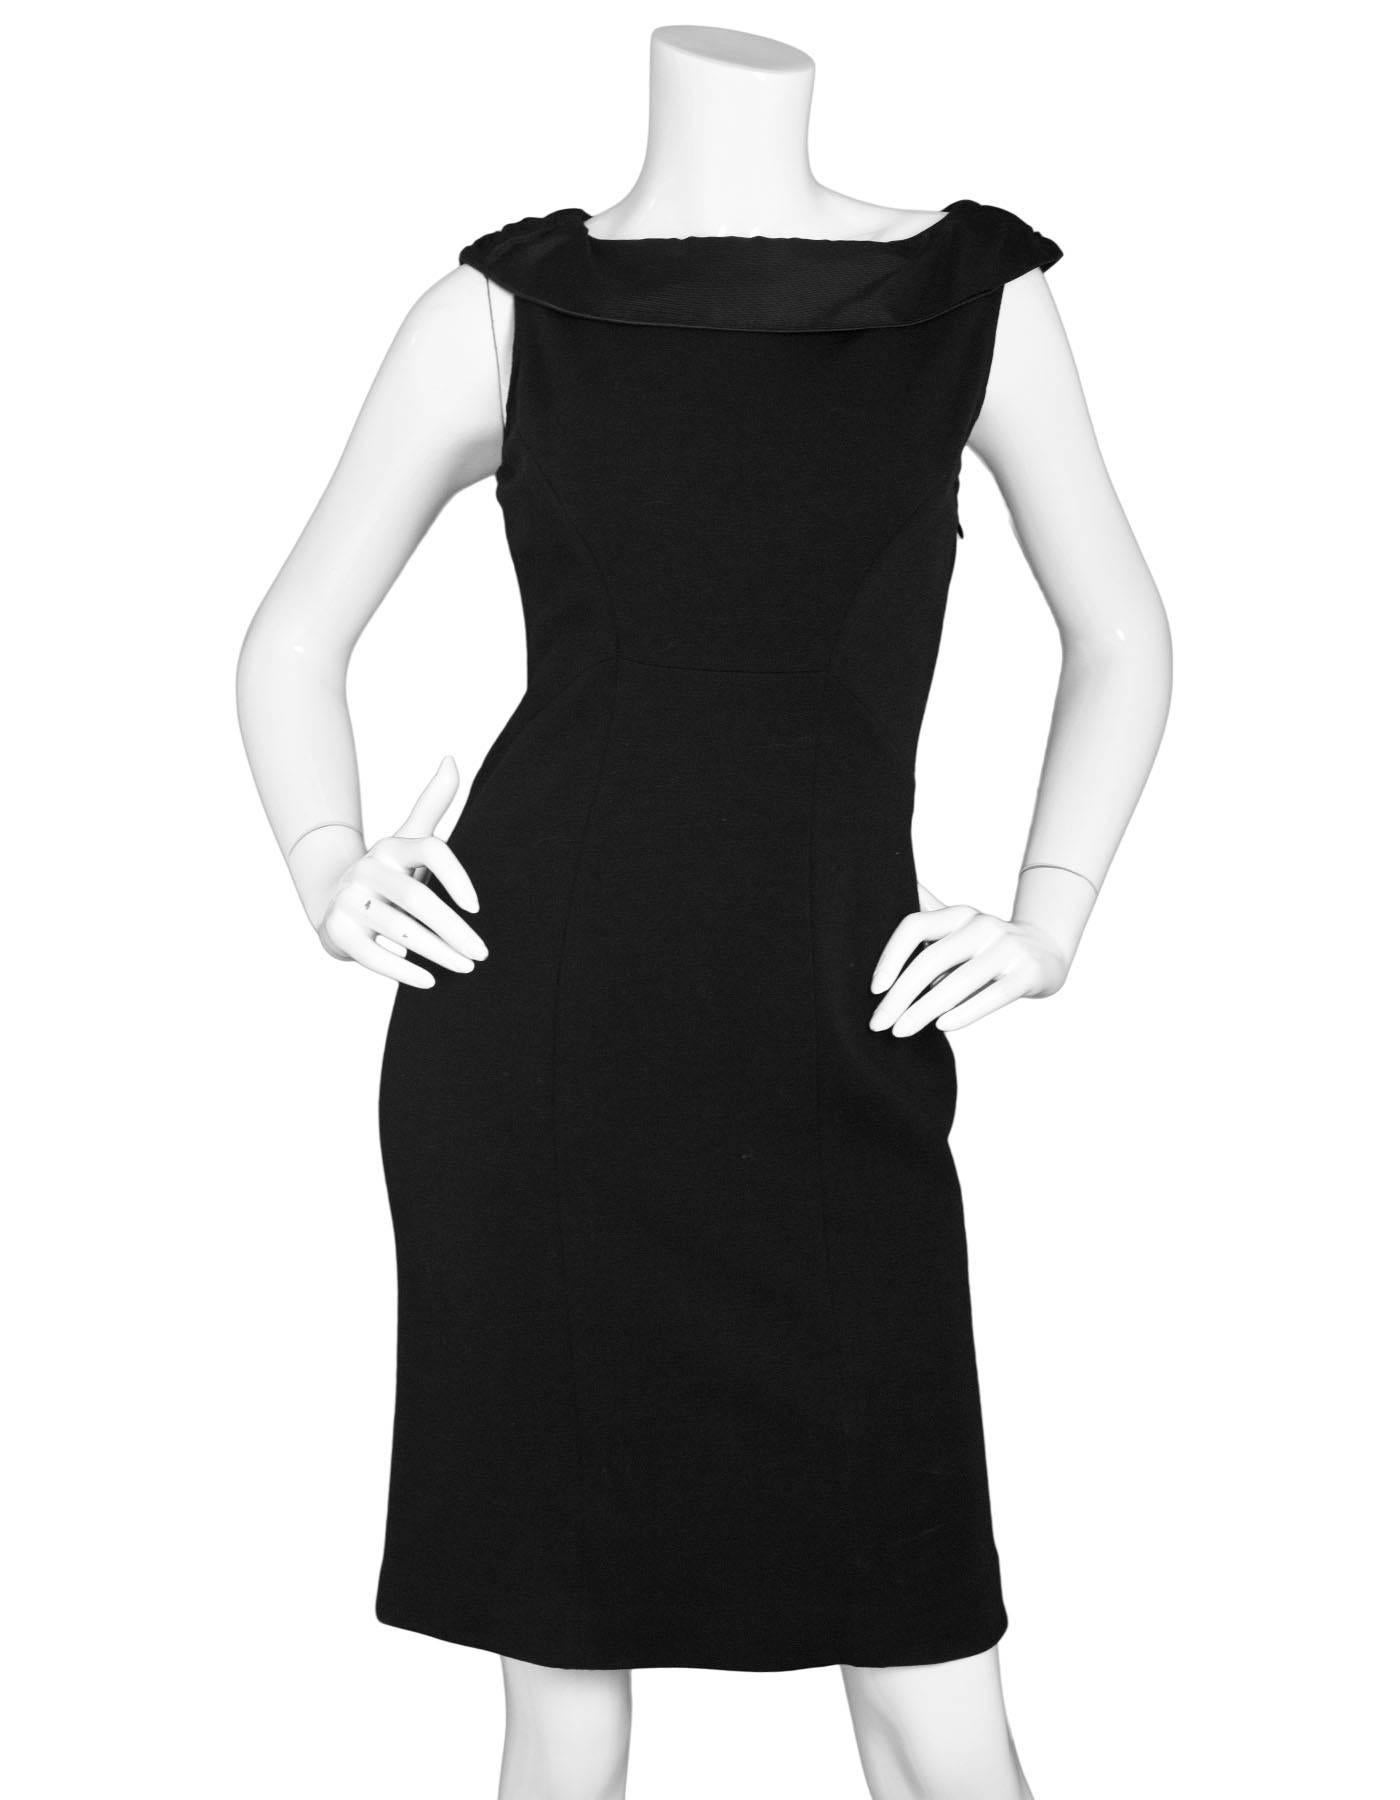 Diane von Furstenberg Black Wool Dress Sz 6

Made In: China
Color: Black
Composition: 76% wool, 21% nylon, 3% spandex
Lining: None
Closure/Opening: Side zip closure
Exterior Pockets: None
Overall Condition: Excellent pre-owned condition, gentle wear